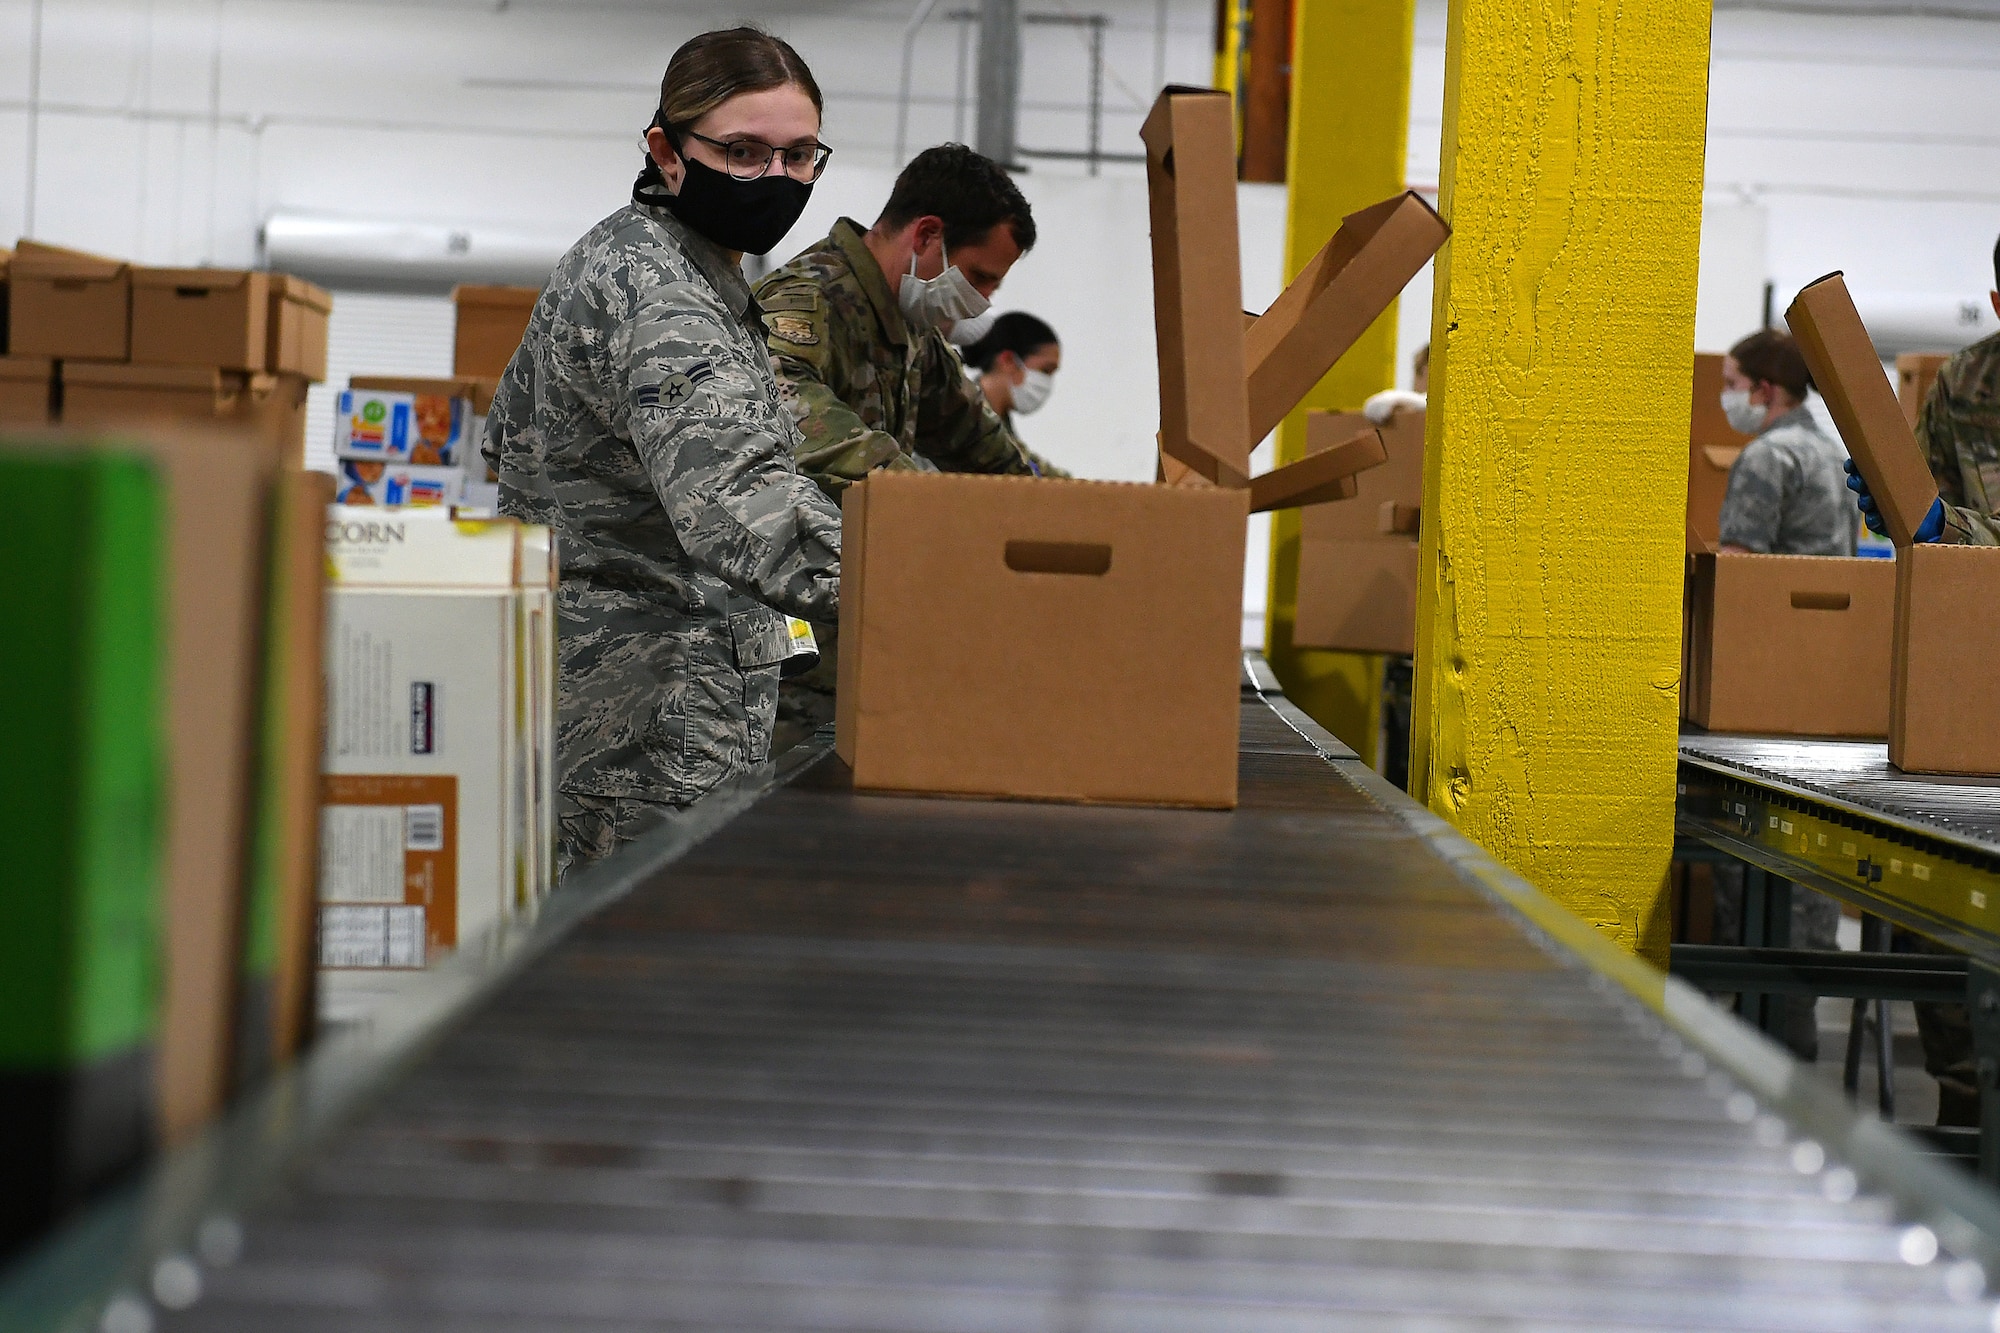 Washington Air National Guard Airman 1st Class Grace Tesch, 141st Medical Group, packs food boxes at the Food Lifeline Covid Response warehouse in Seattle April 23, 2020. More than 250 Air and Army National Guard members are assigned to the warehouse to prepare, on average, 268 boxes an hour.